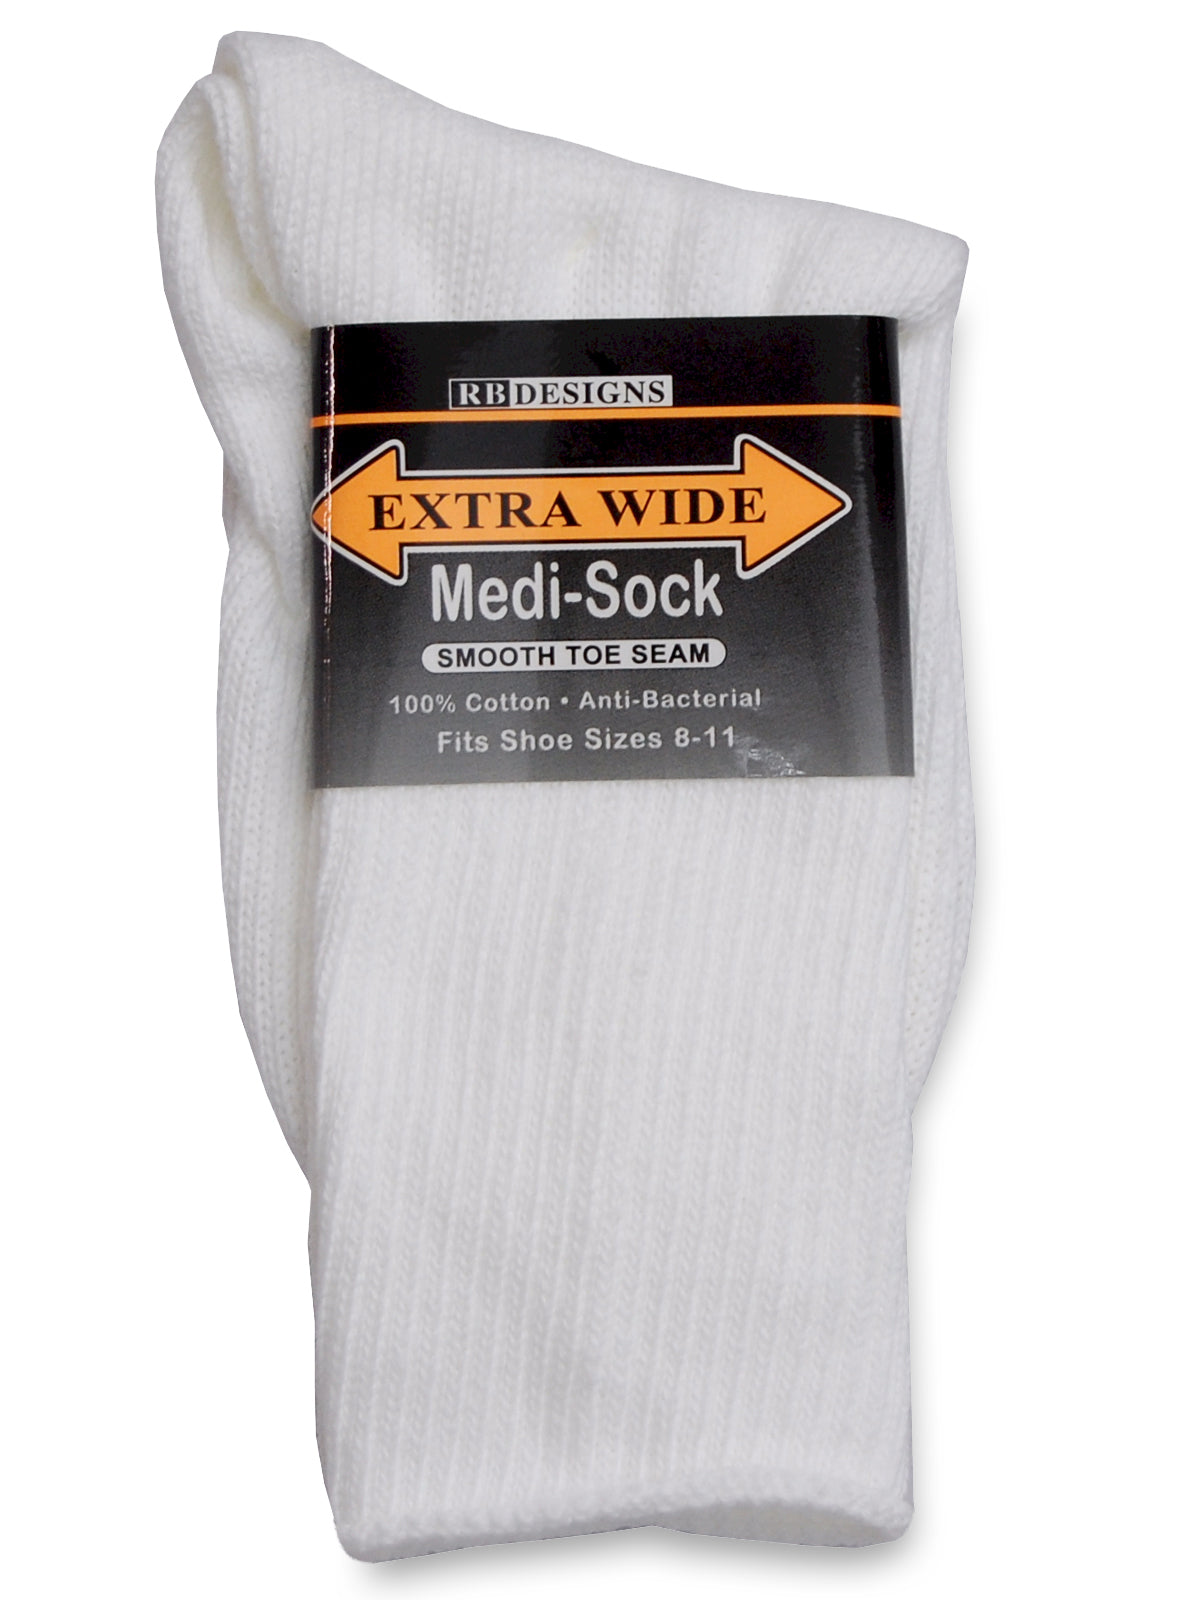 Extra Wide Medical Crew Sock in White - Size Small (5 - 8)